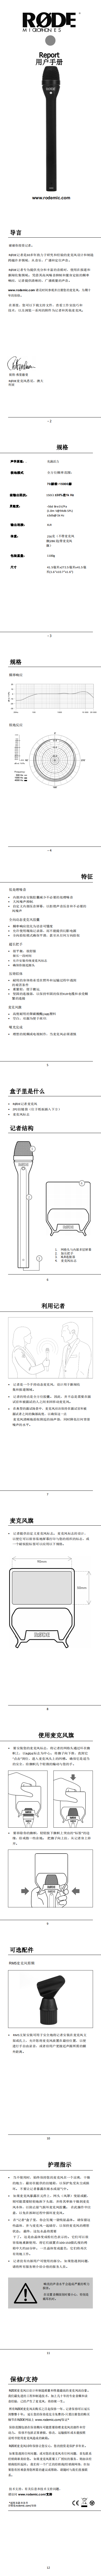 Reporter_user_manual_1_12_translate_Chinese_0.png